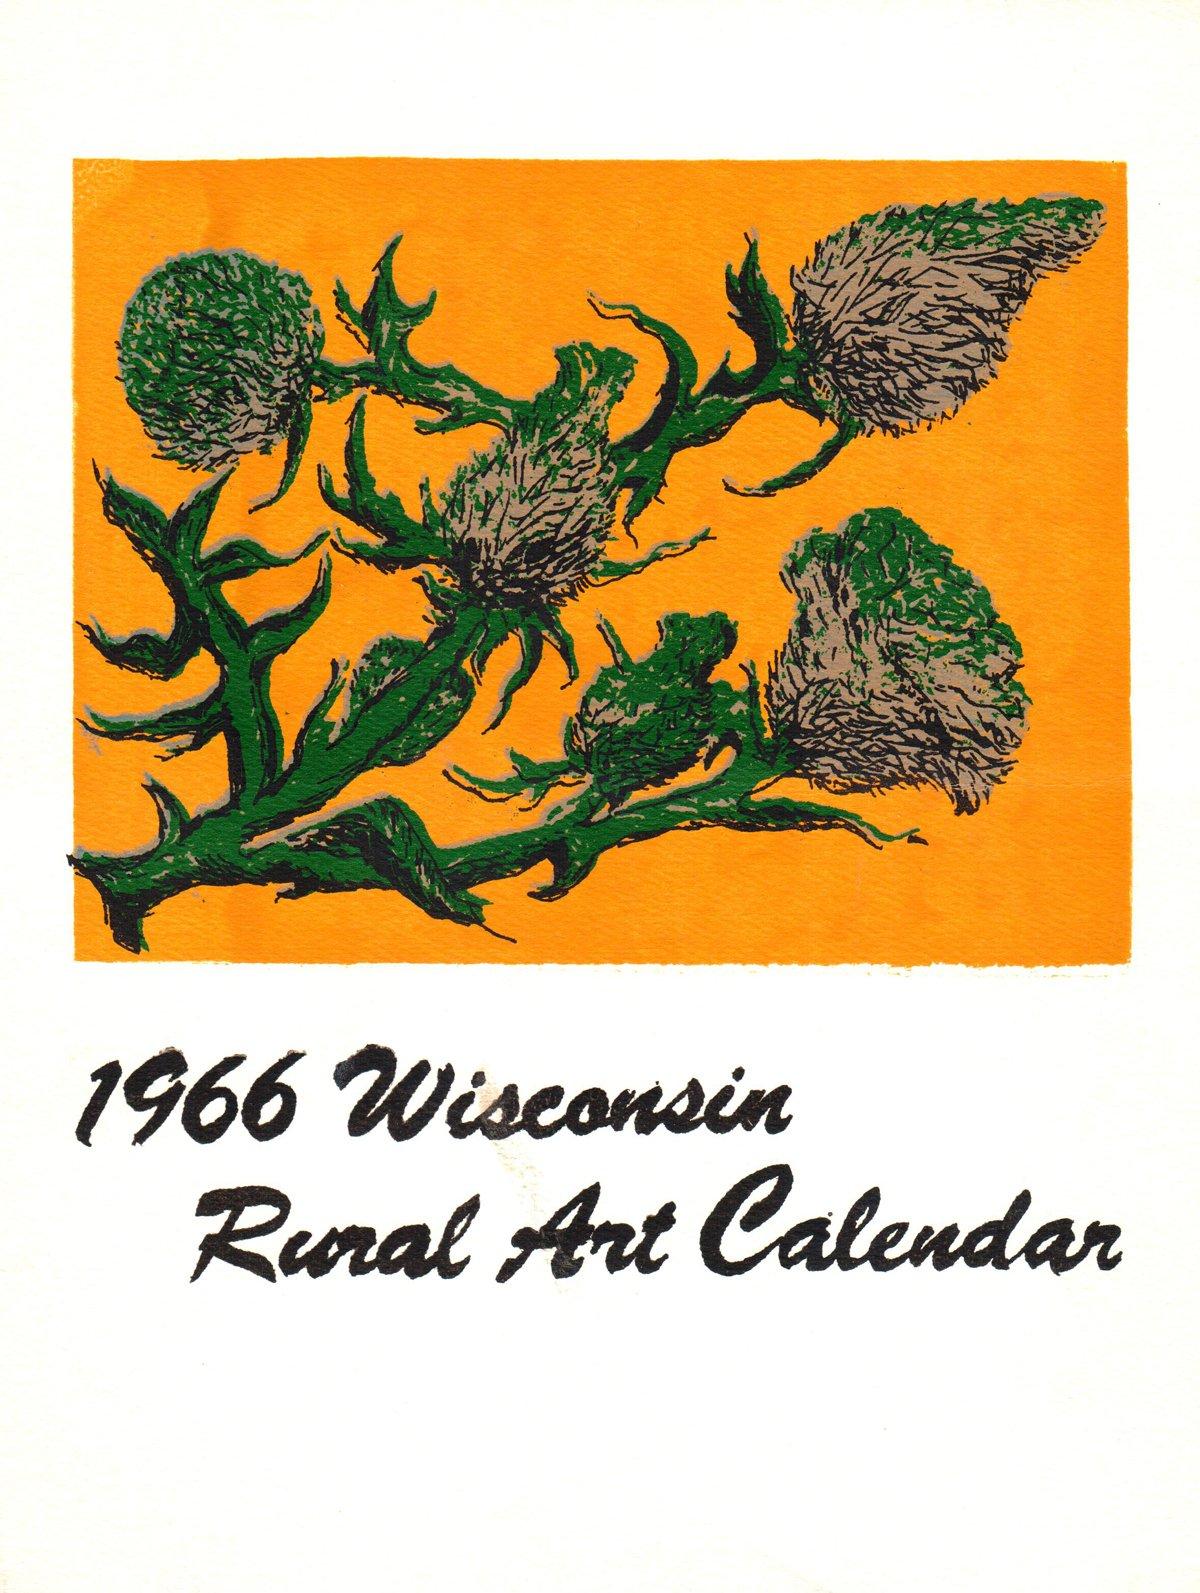 Paper Size: 5.5 x 8.25 inches ( 13.97 x 20.955 cm )
 Image Size: 5.5 x 8.25 inches ( 13.97 x 20.955 cm )
 Framed: No
 Condition: A: Mint
 
 Additional Details: This calendar cover design was patterned after a pen and ink and wash drawing that won an